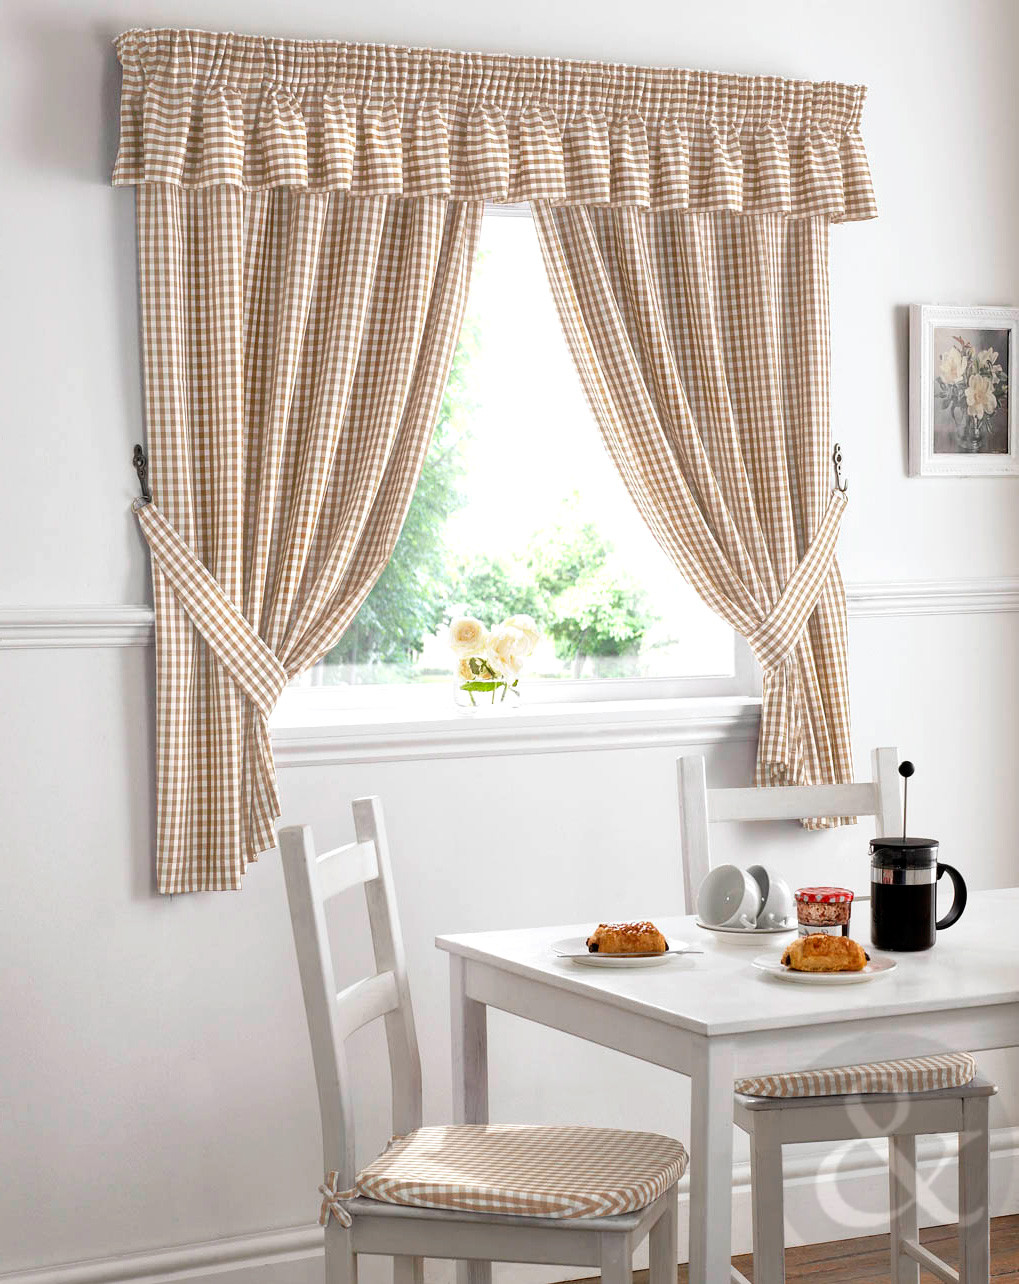 Gingham Kitchen Curtains
 Gingham Check Kitchen Curtains Ready Made Pencil Pleat Net